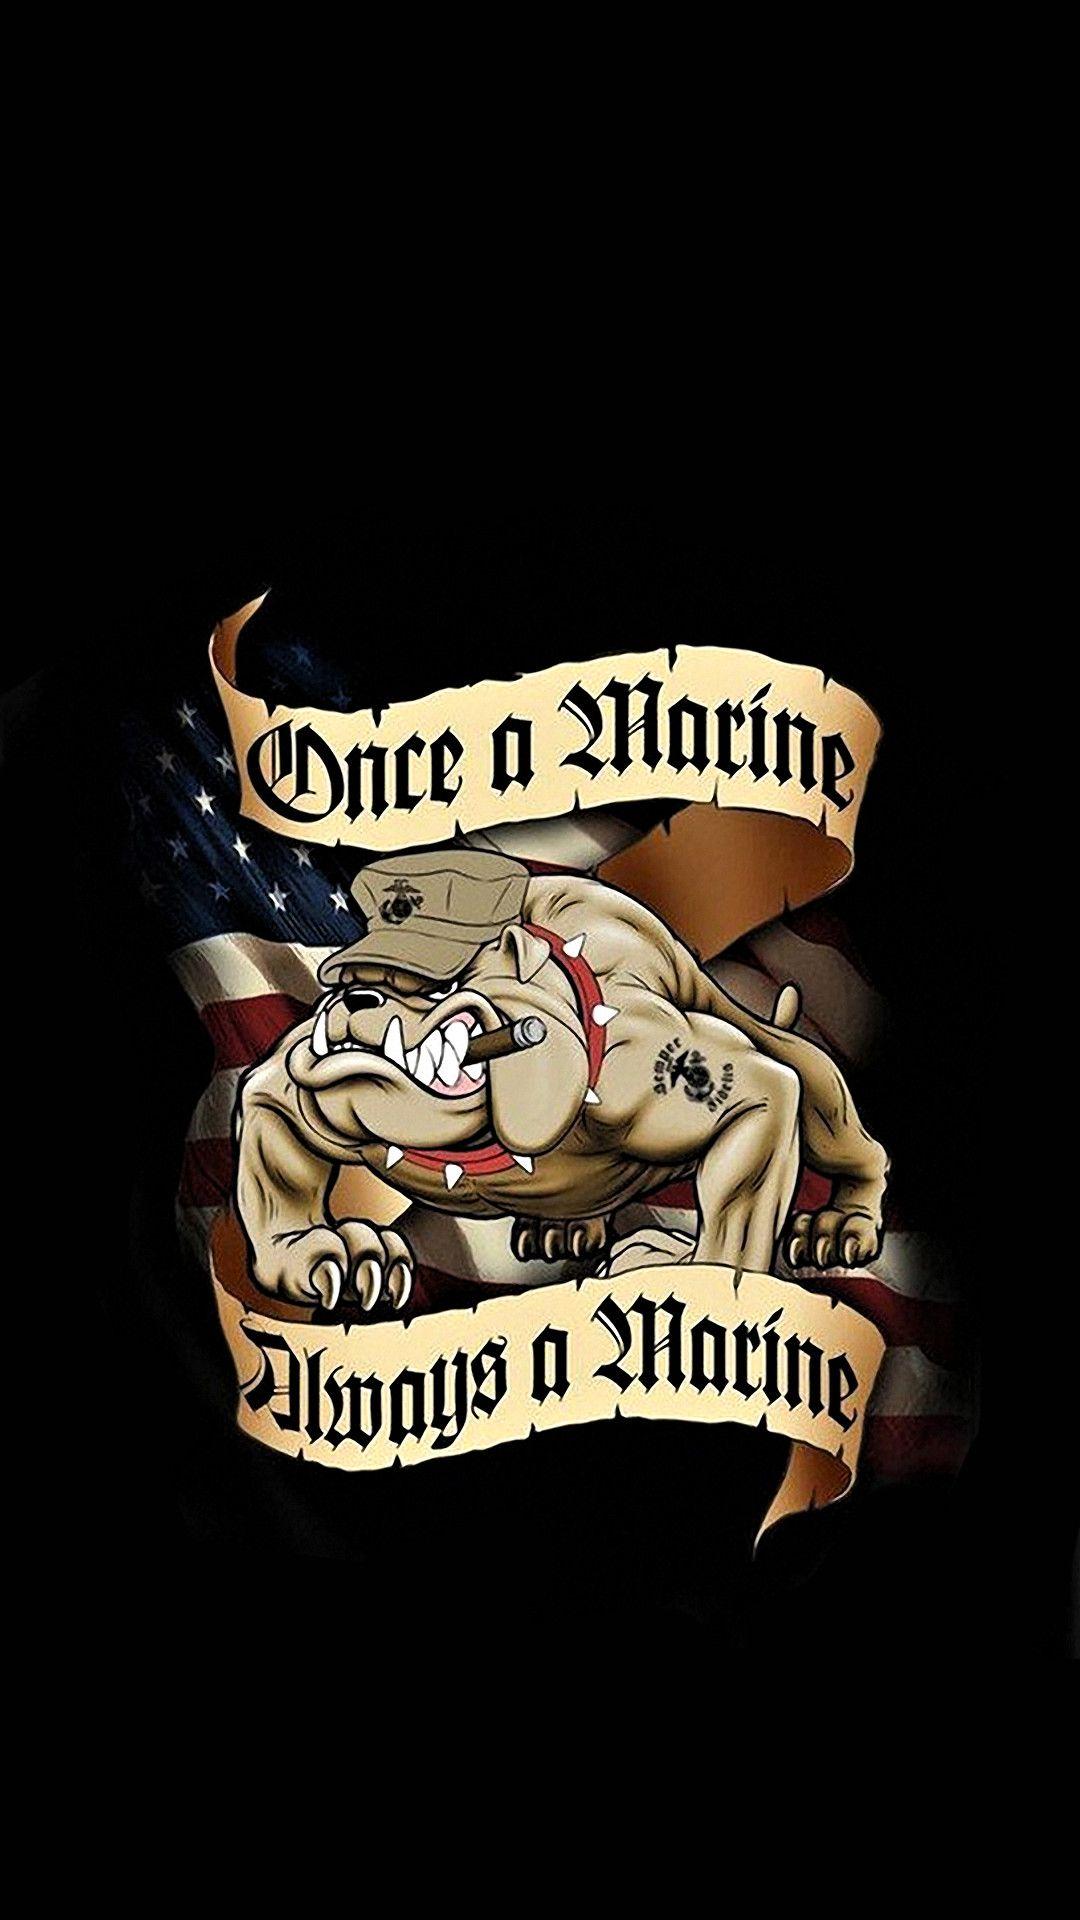 Us Marine Corps Iphone Wallpapers Top Free Us Marine Corps Iphone Backgrounds Wallpaperaccess